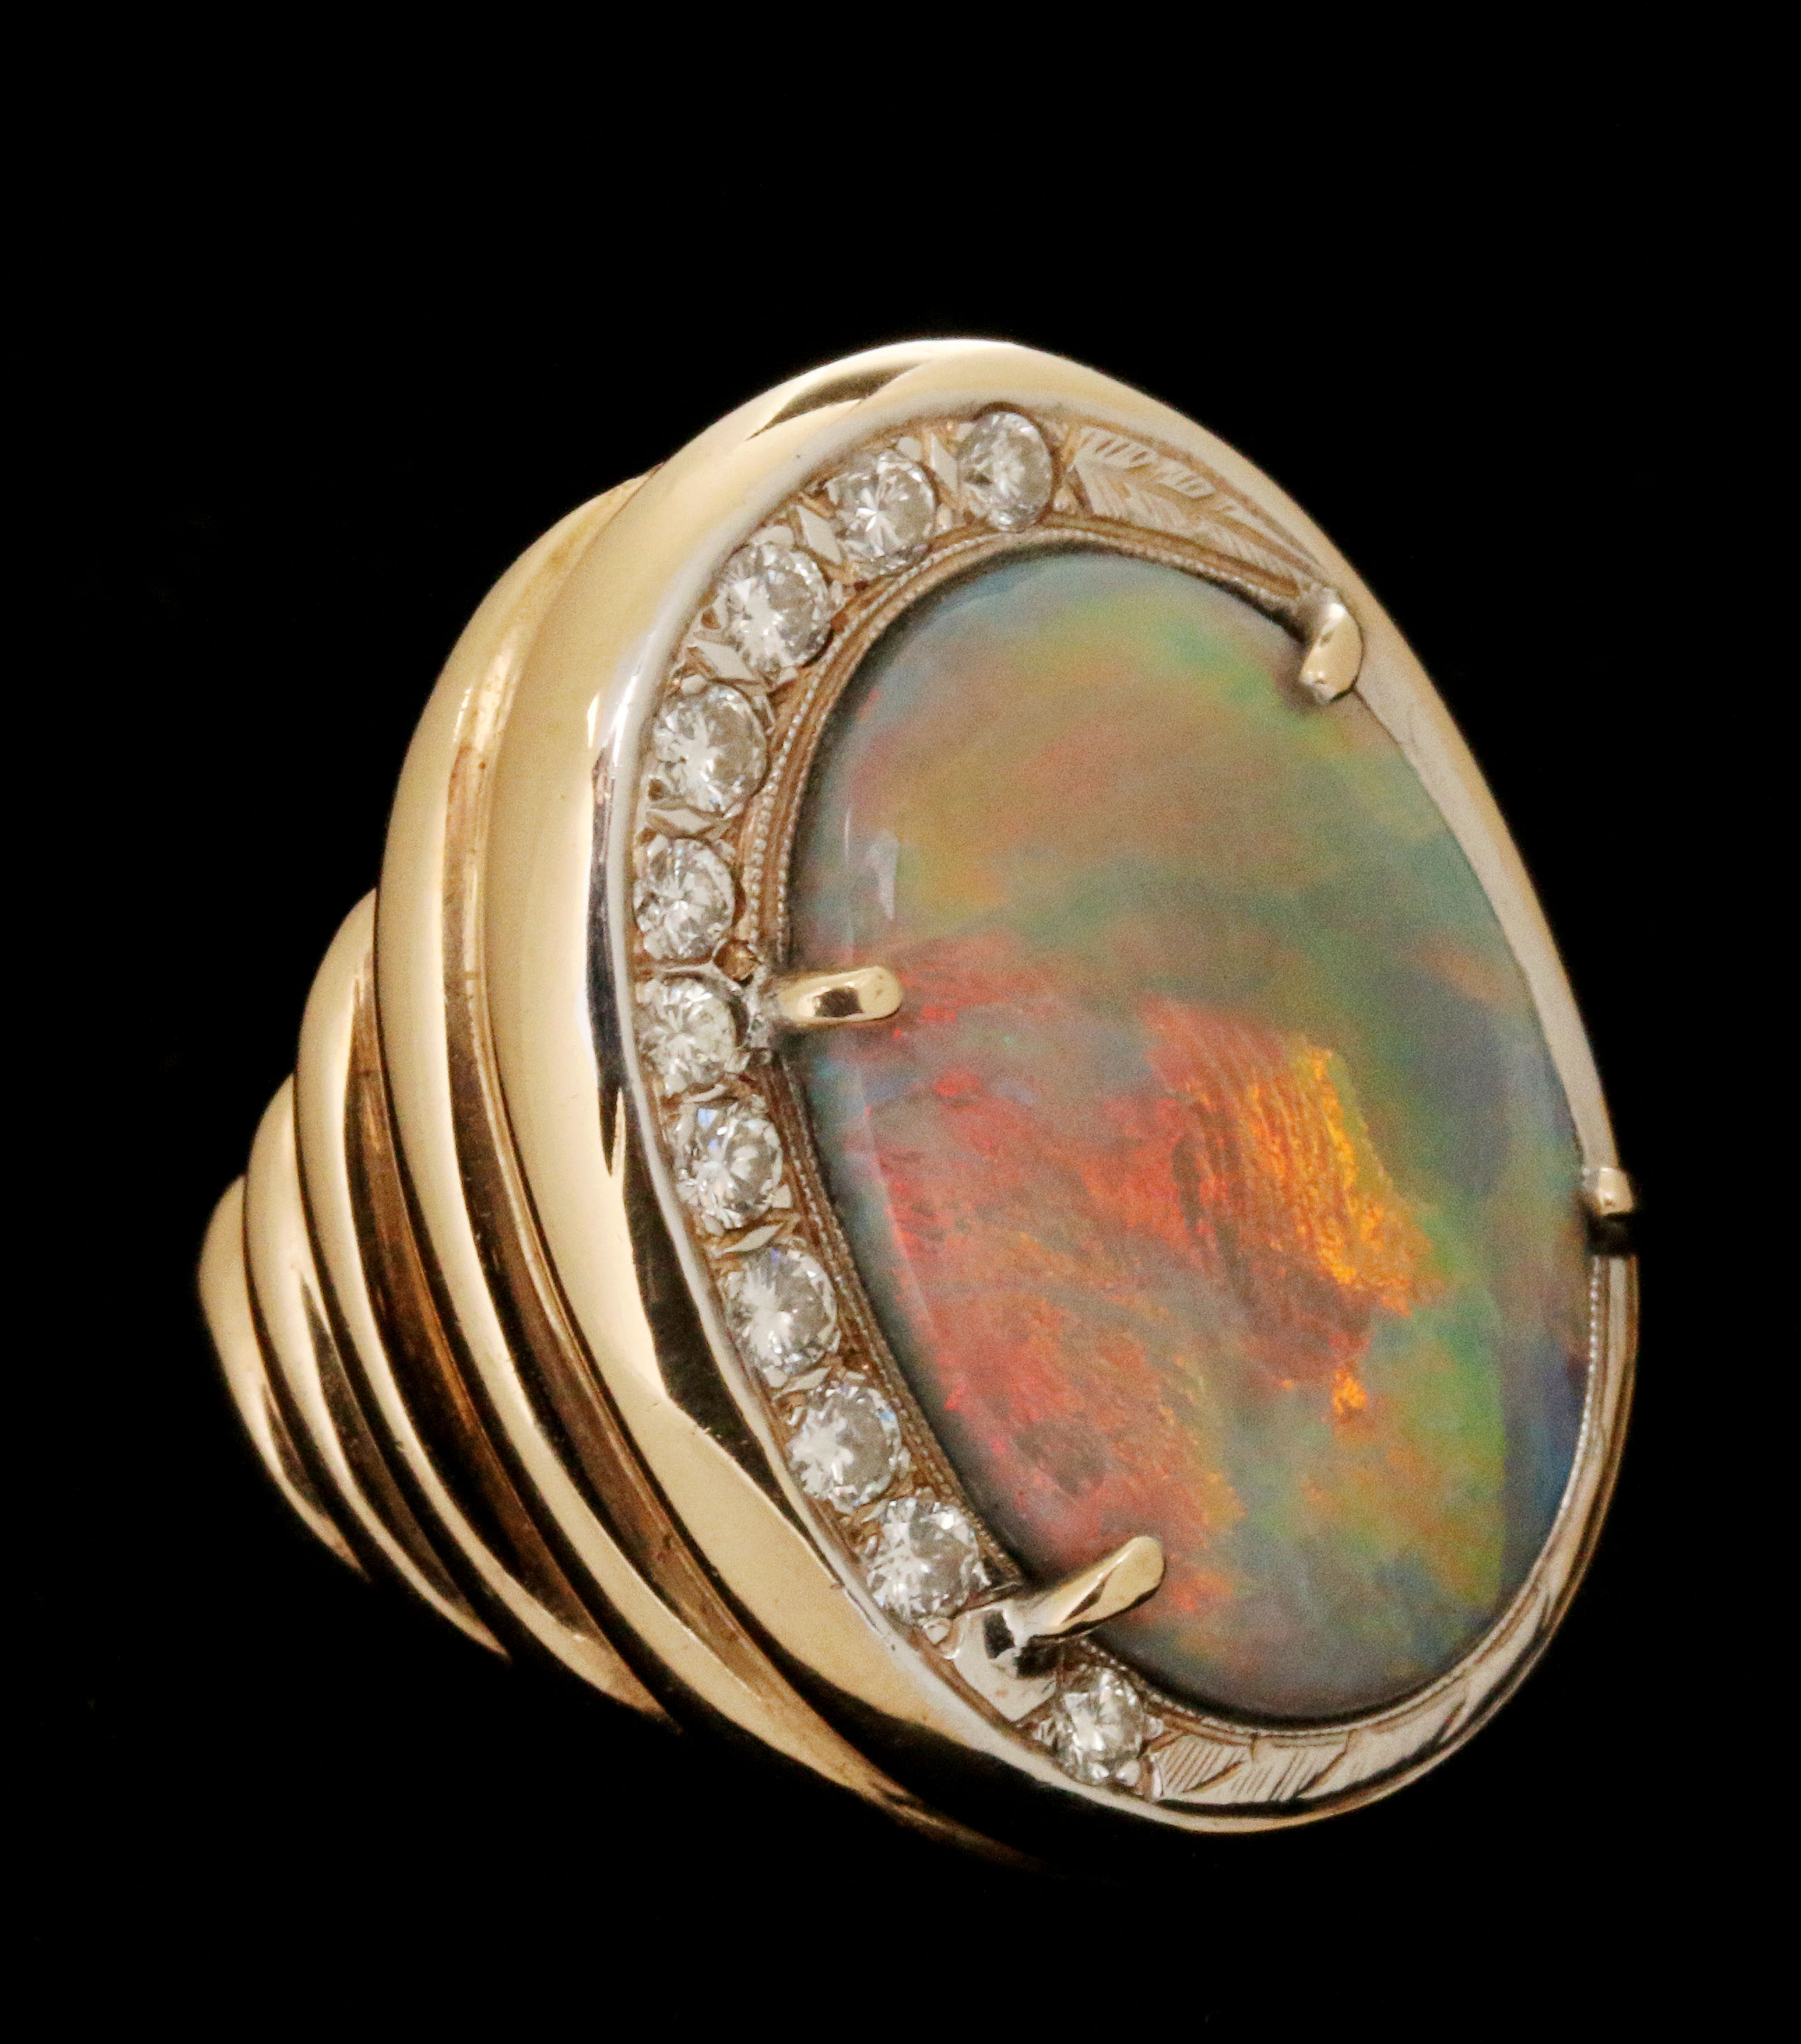 A LADIES FIERY OPAL RING WITH 1/3 CARAT TW OF DIAM